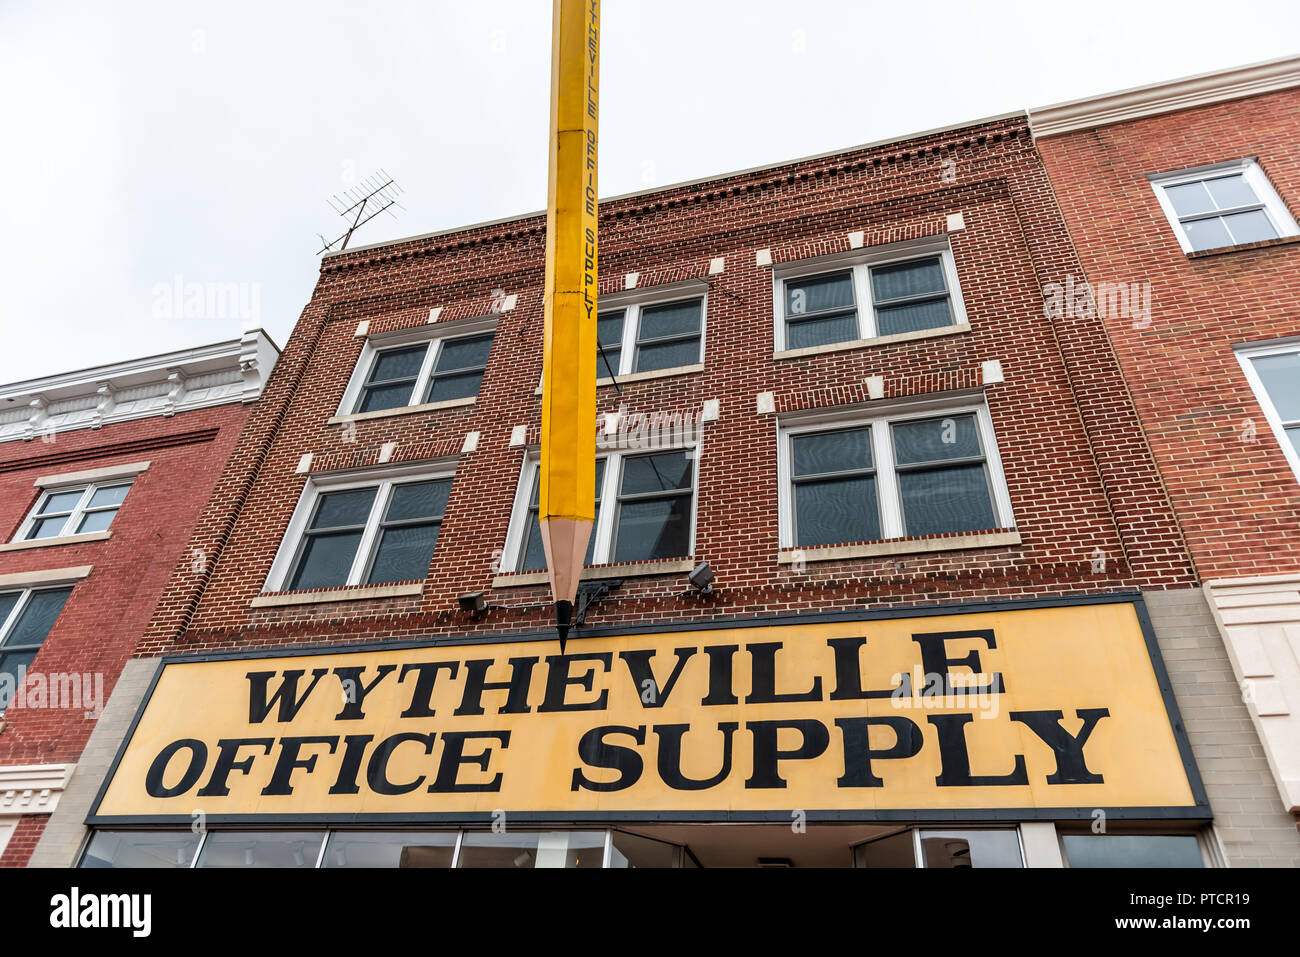 Wytheville, USA - April 19, 2018: Small town village sign for office supply in southern south Virginia with largest big pencil exterior Stock Photo